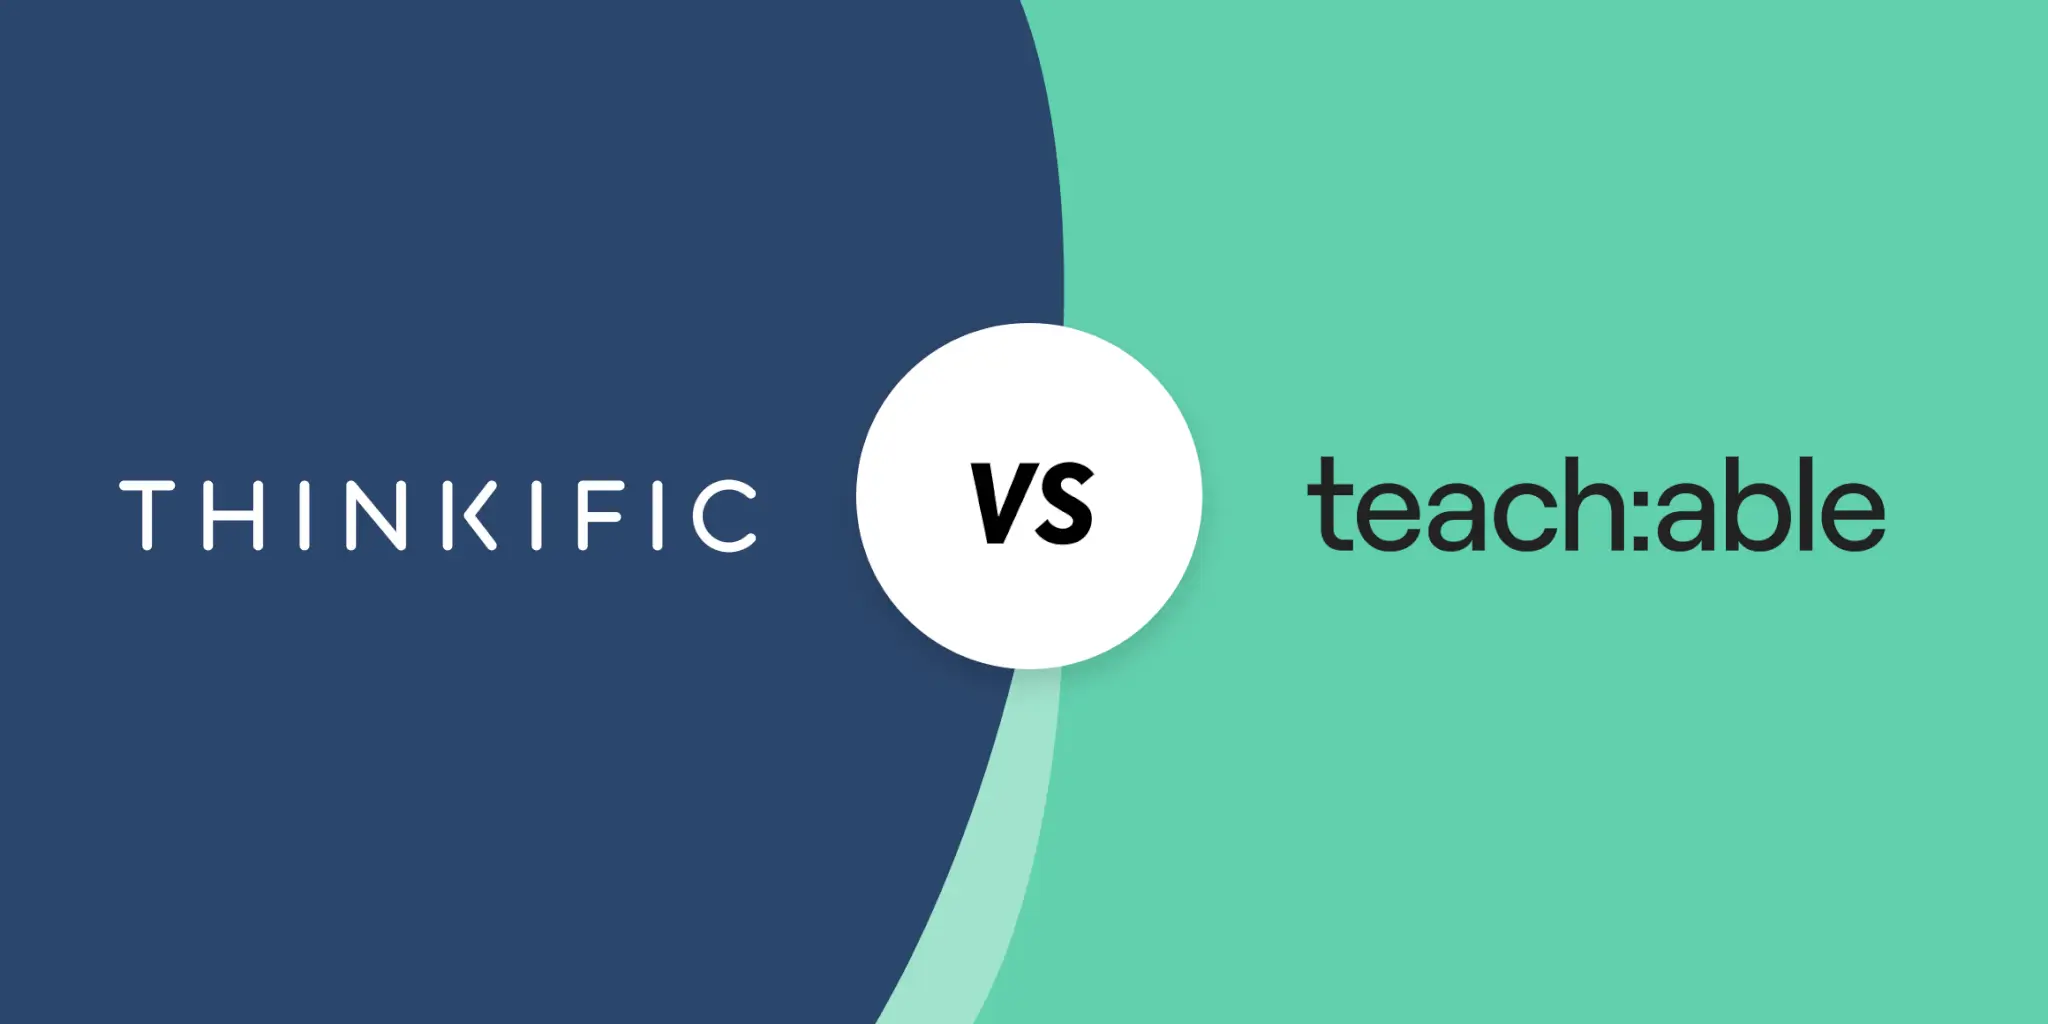 Comparison between Thinkific vs Teachable cover image.